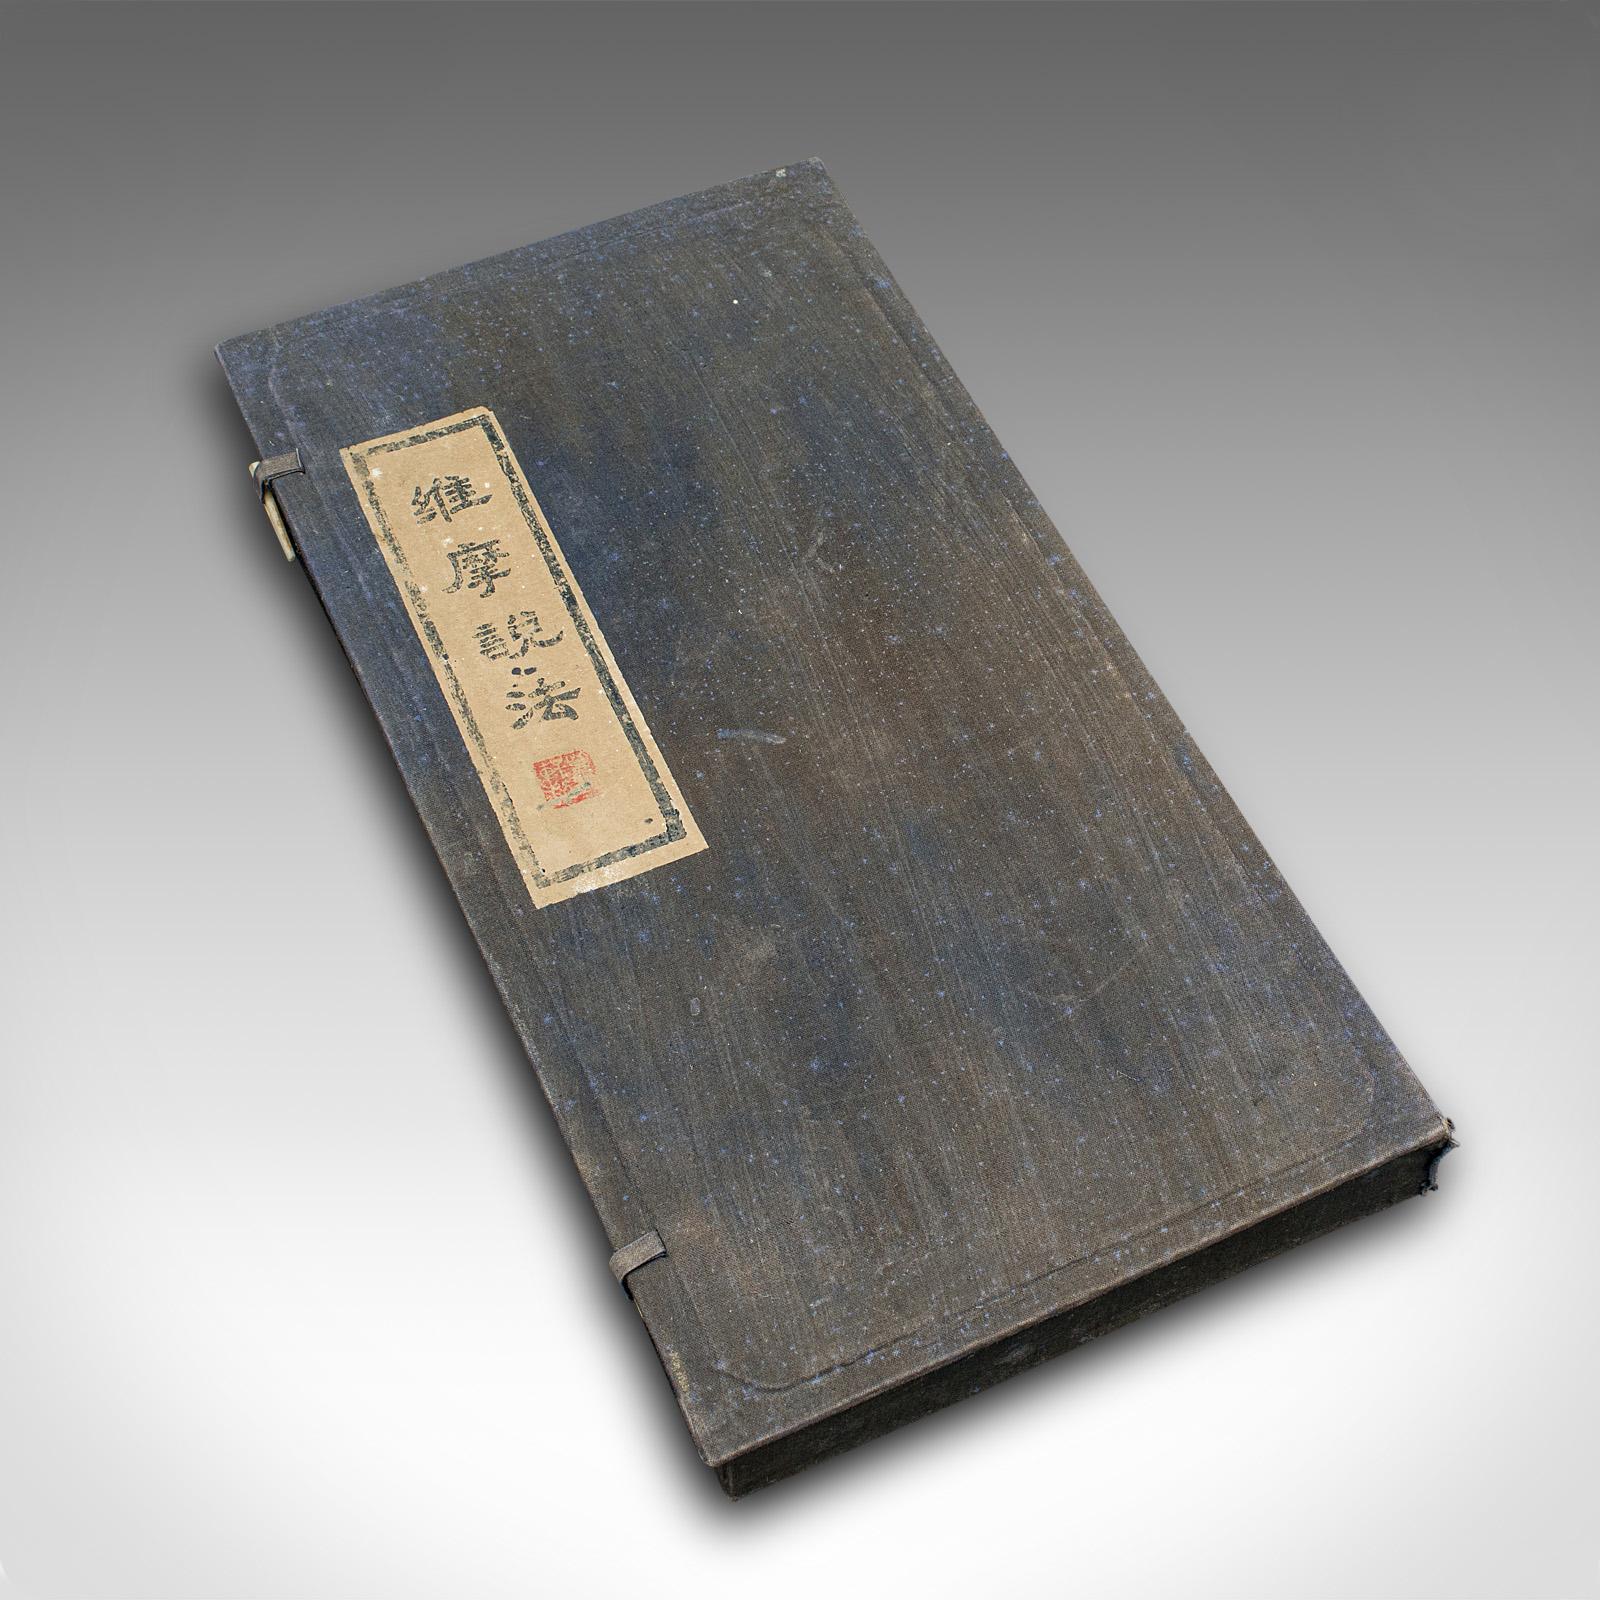 This is a large antique calligraphic ink block. A Chinese, boxed soot ink printing stone, dating to the late Victorian period, circa 1900.

Superb proportion, with delightful artistic appeal
Displays a desirable aged patina and in good original